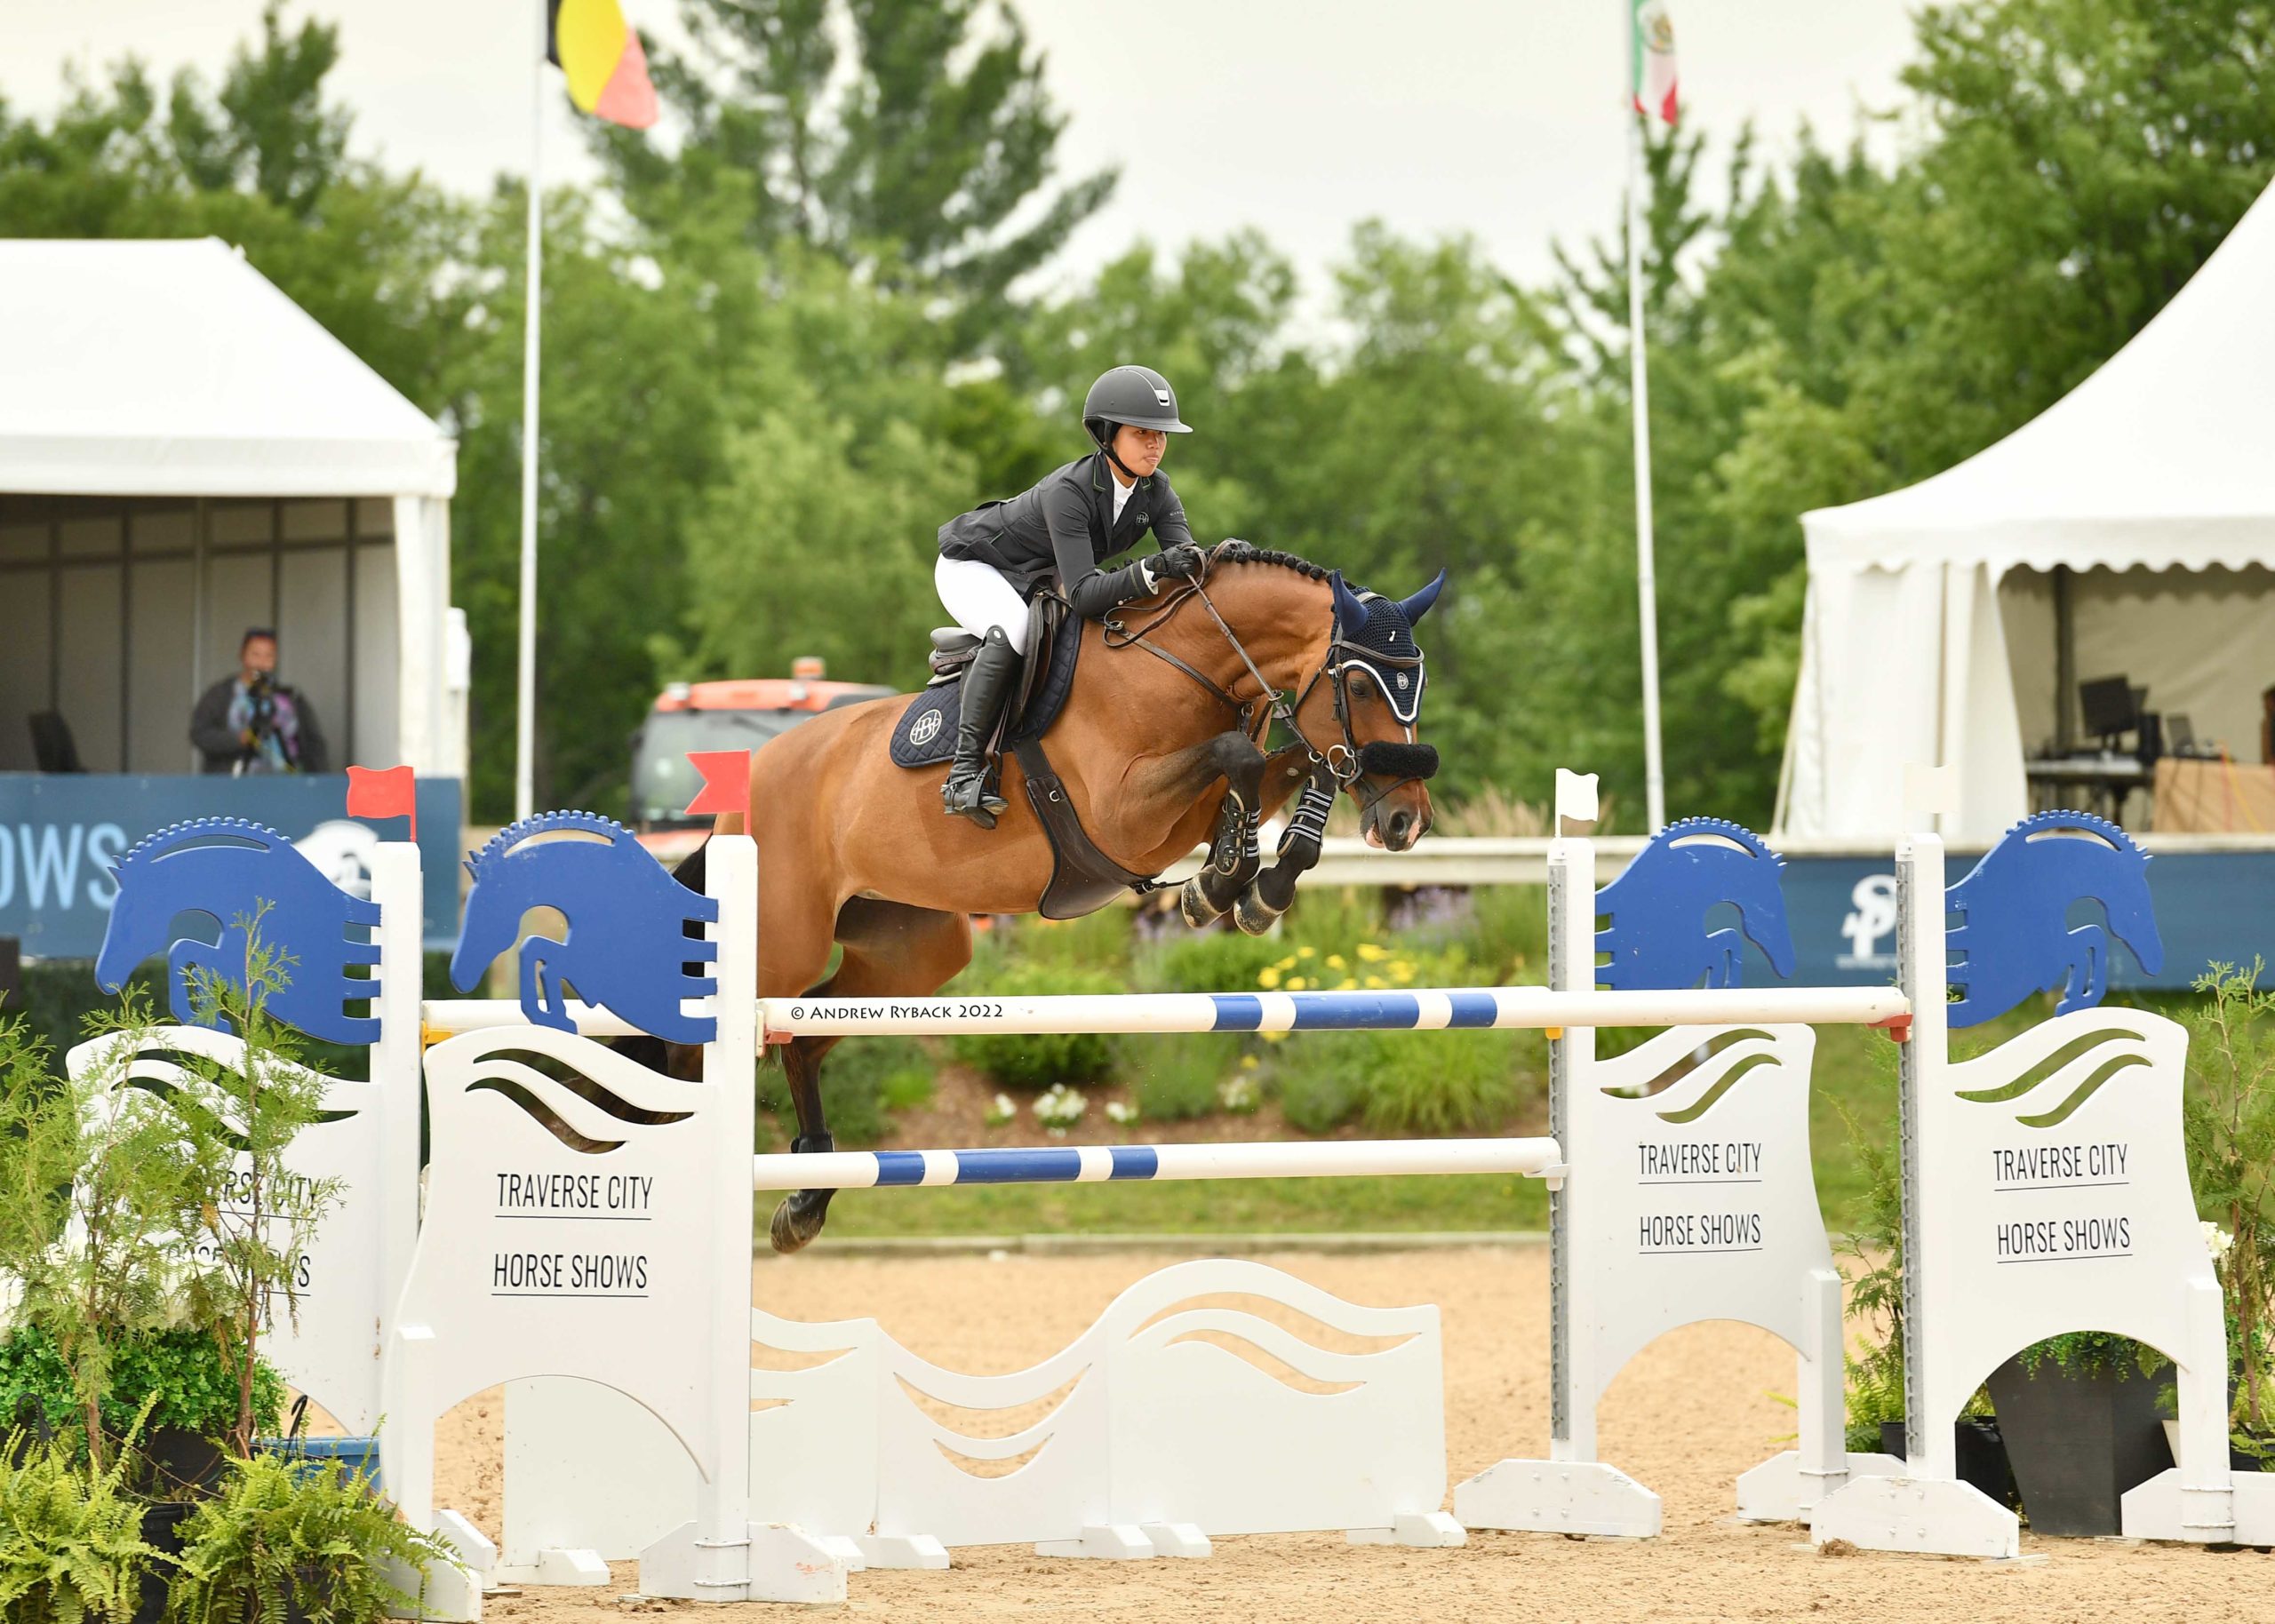 GOCHMAN CLAIMS FIRST CSI3* VICTORY IN $37,000 INNOVO CSI3* WELCOME STAKE